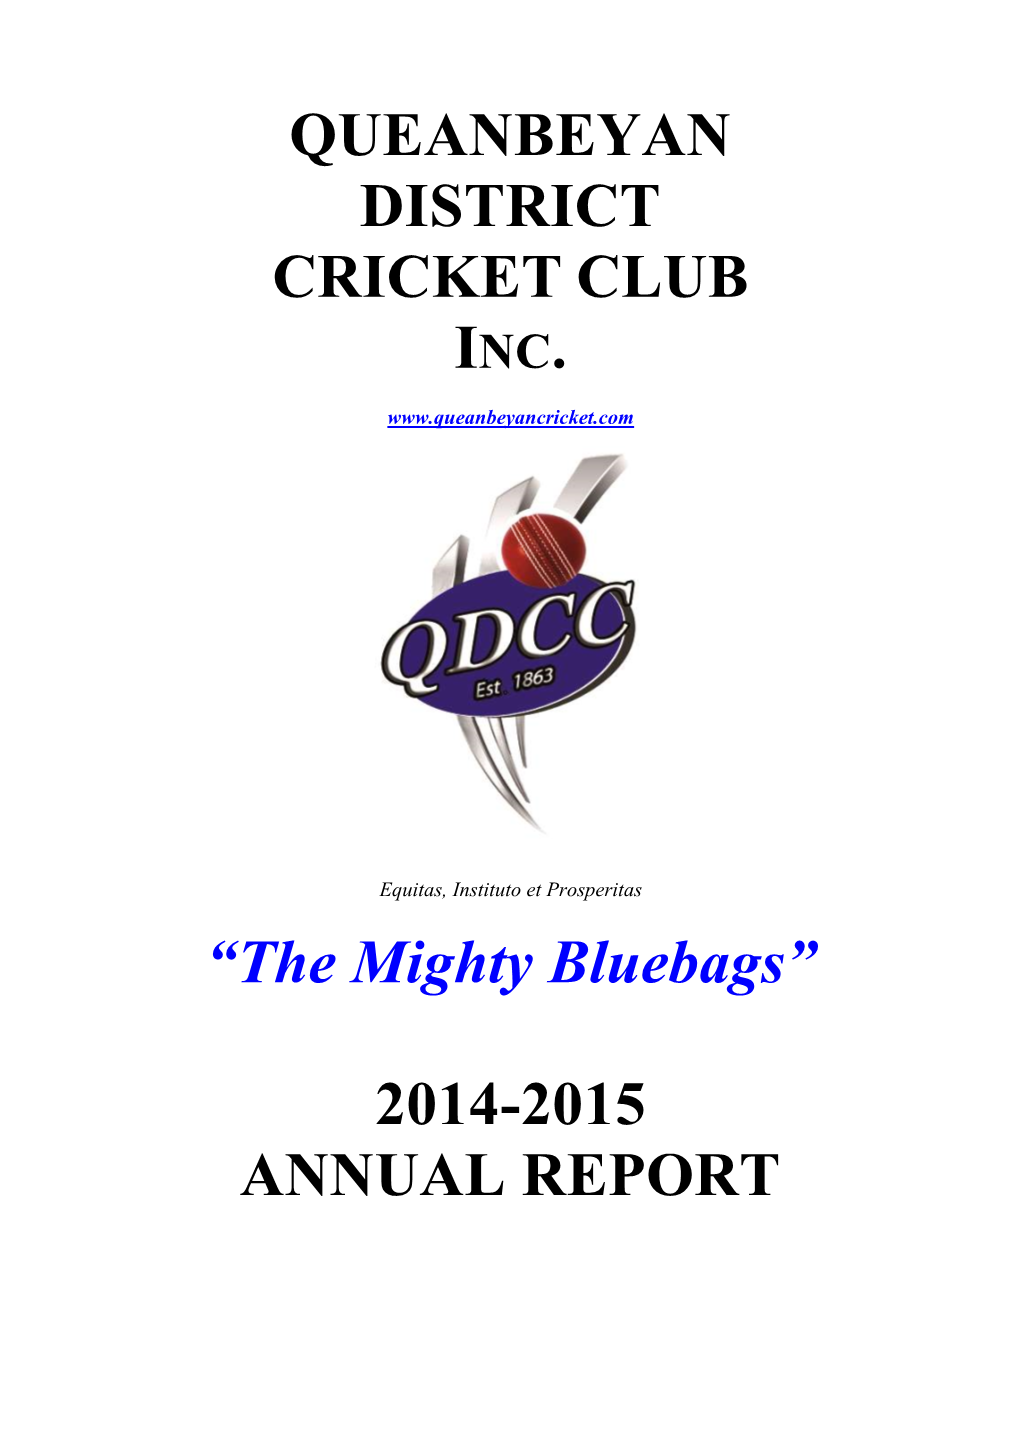 QUEANBEYAN DISTRICT CRICKET CLUB “The Mighty Bluebags” 2014